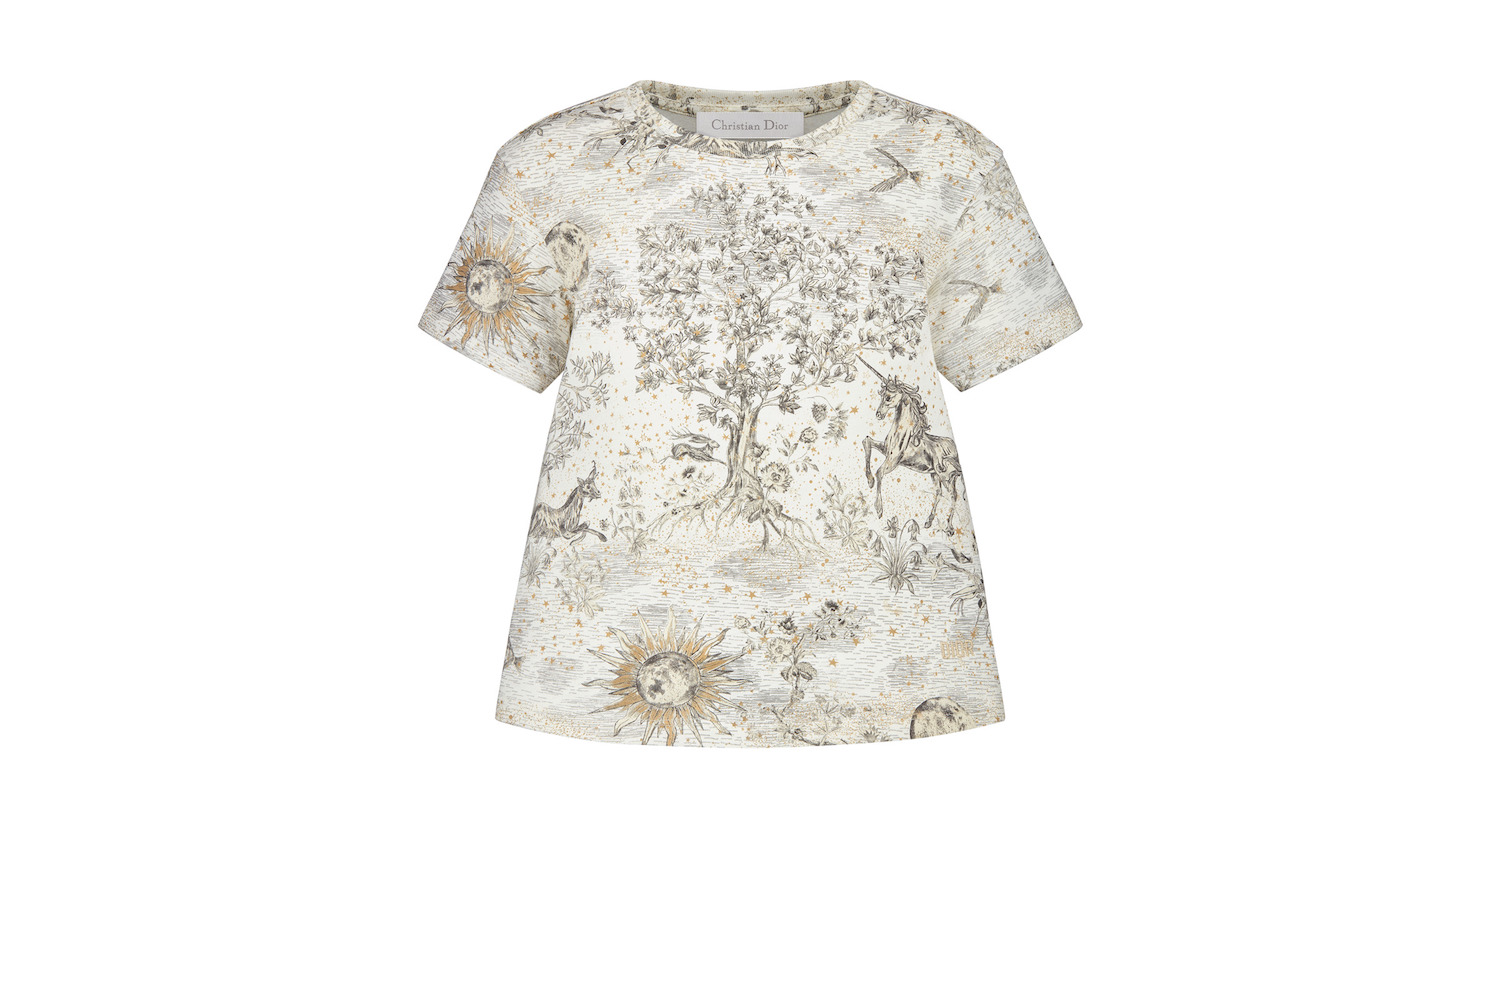  Dior kids girl's Fall/Winter T-shirt. Image courtesy of Dior.